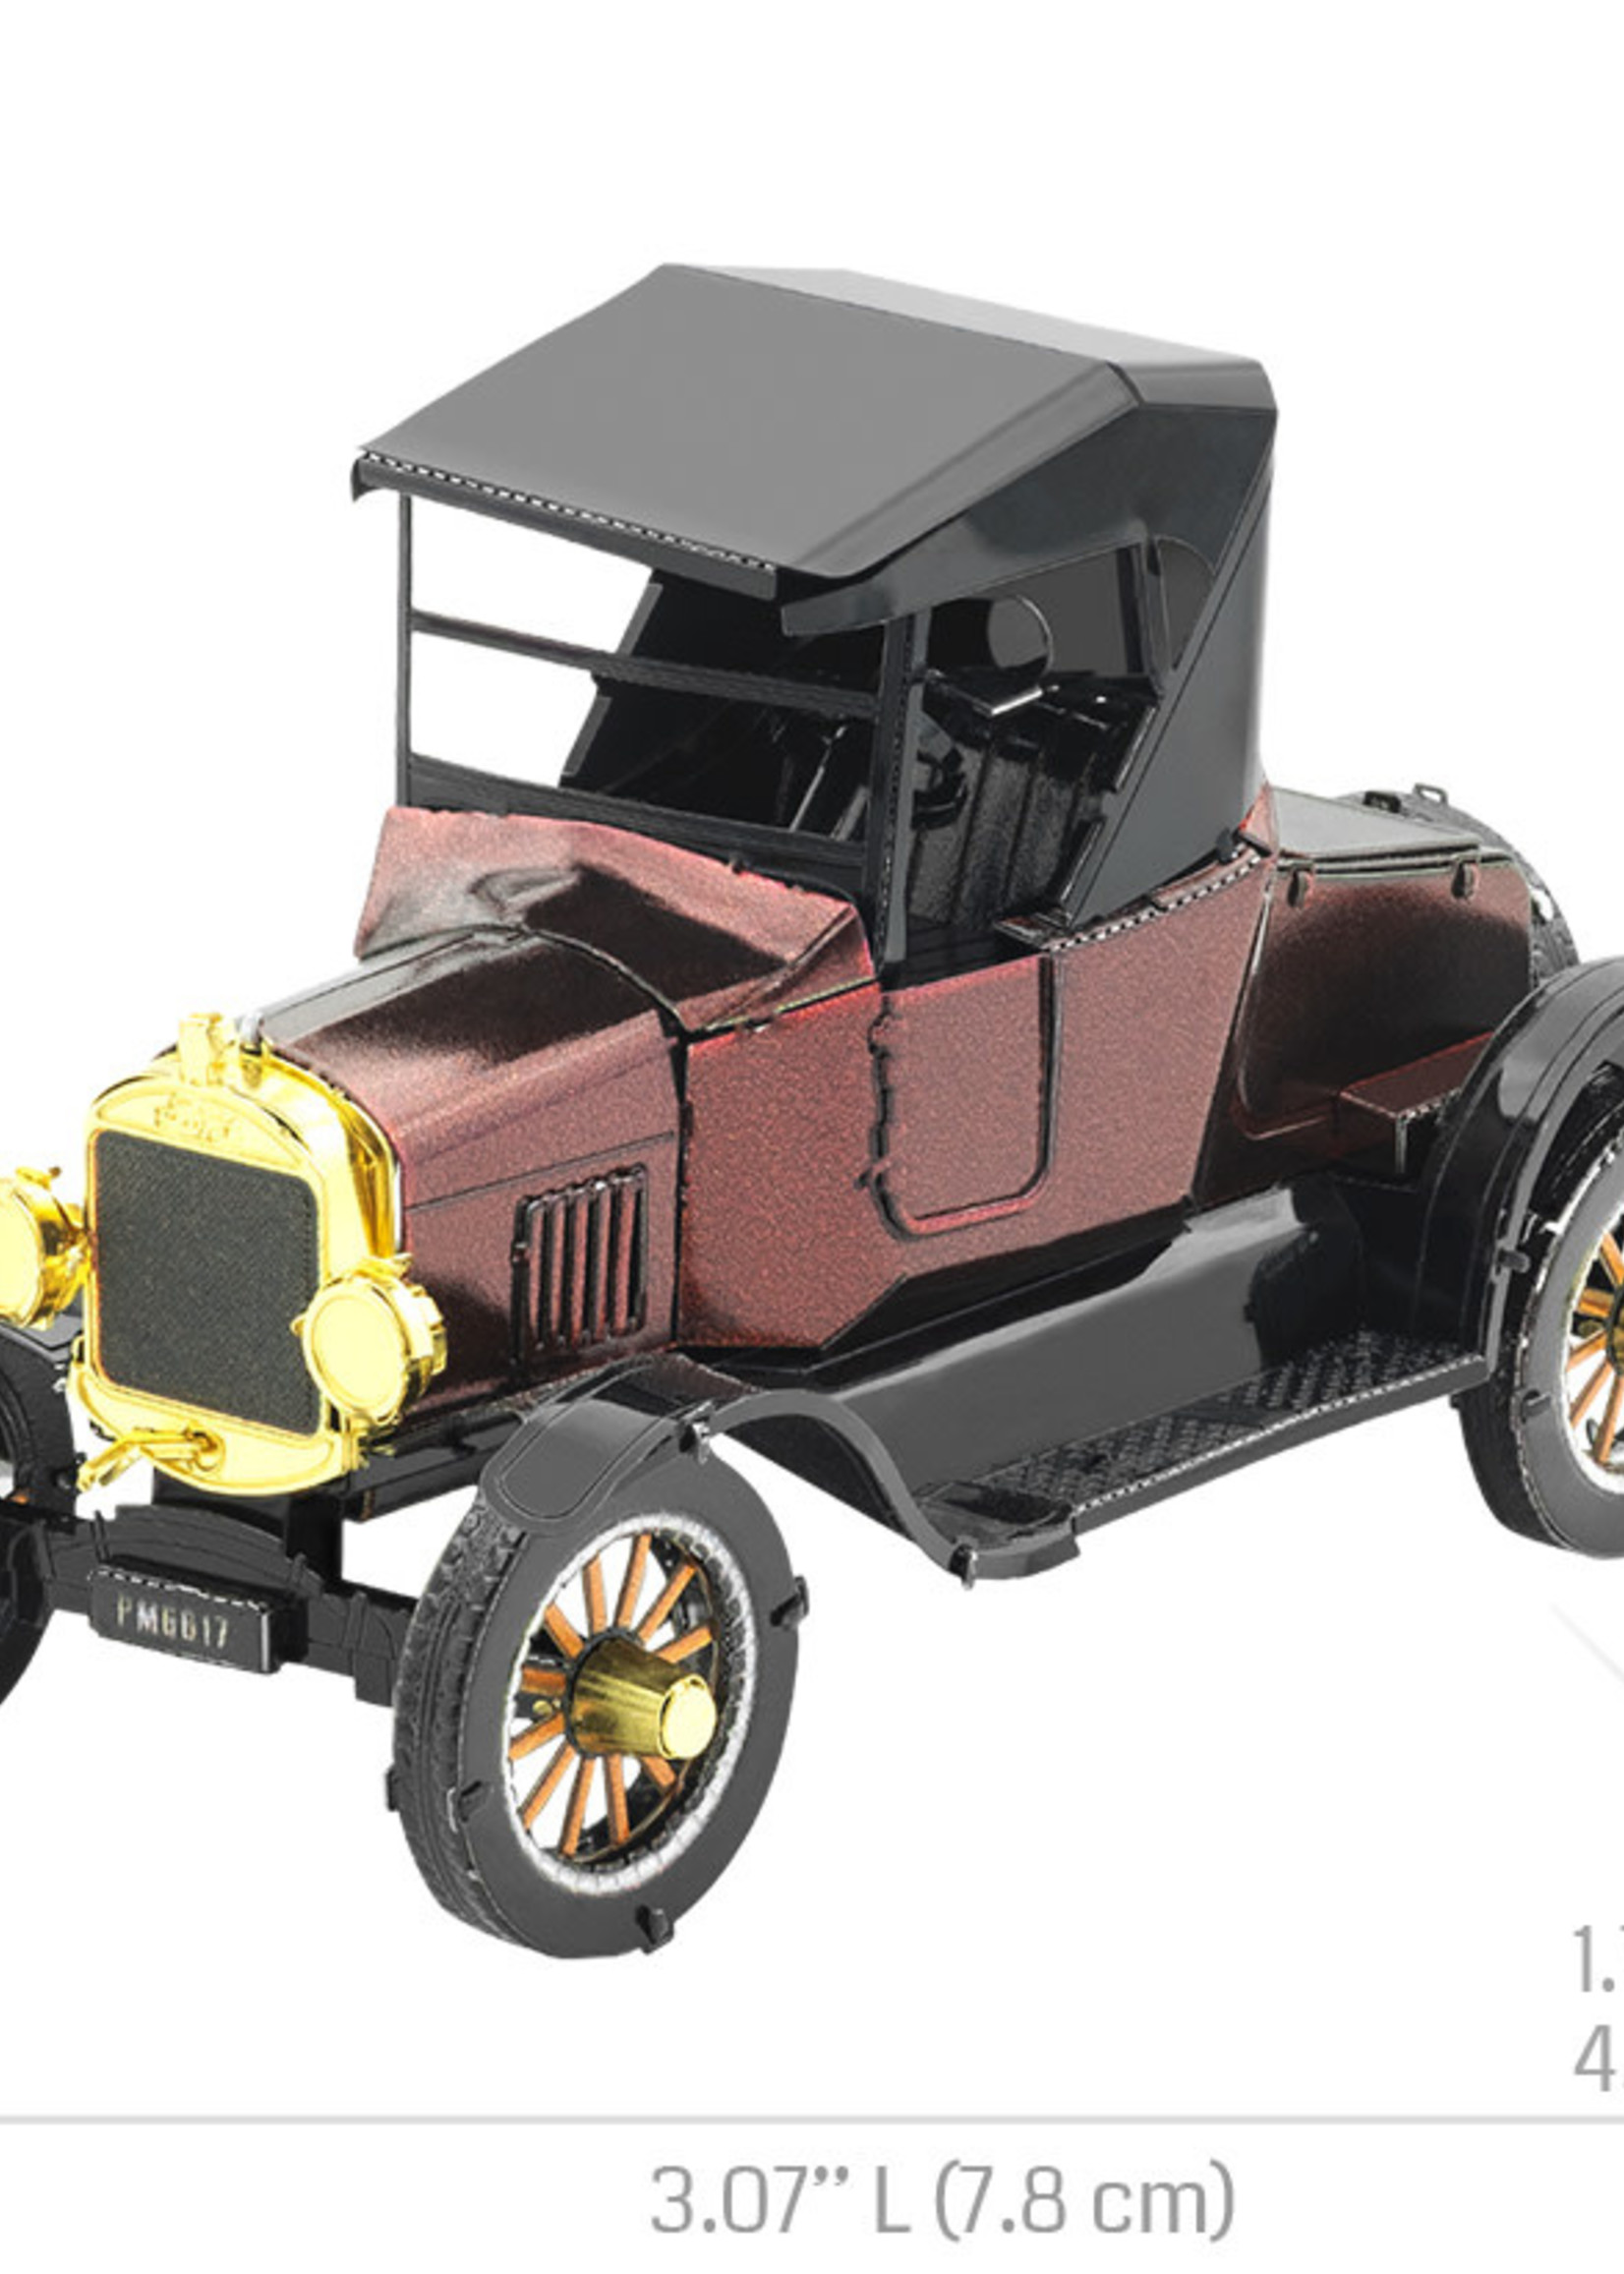 1925 Ford Model T Runabout vehicle